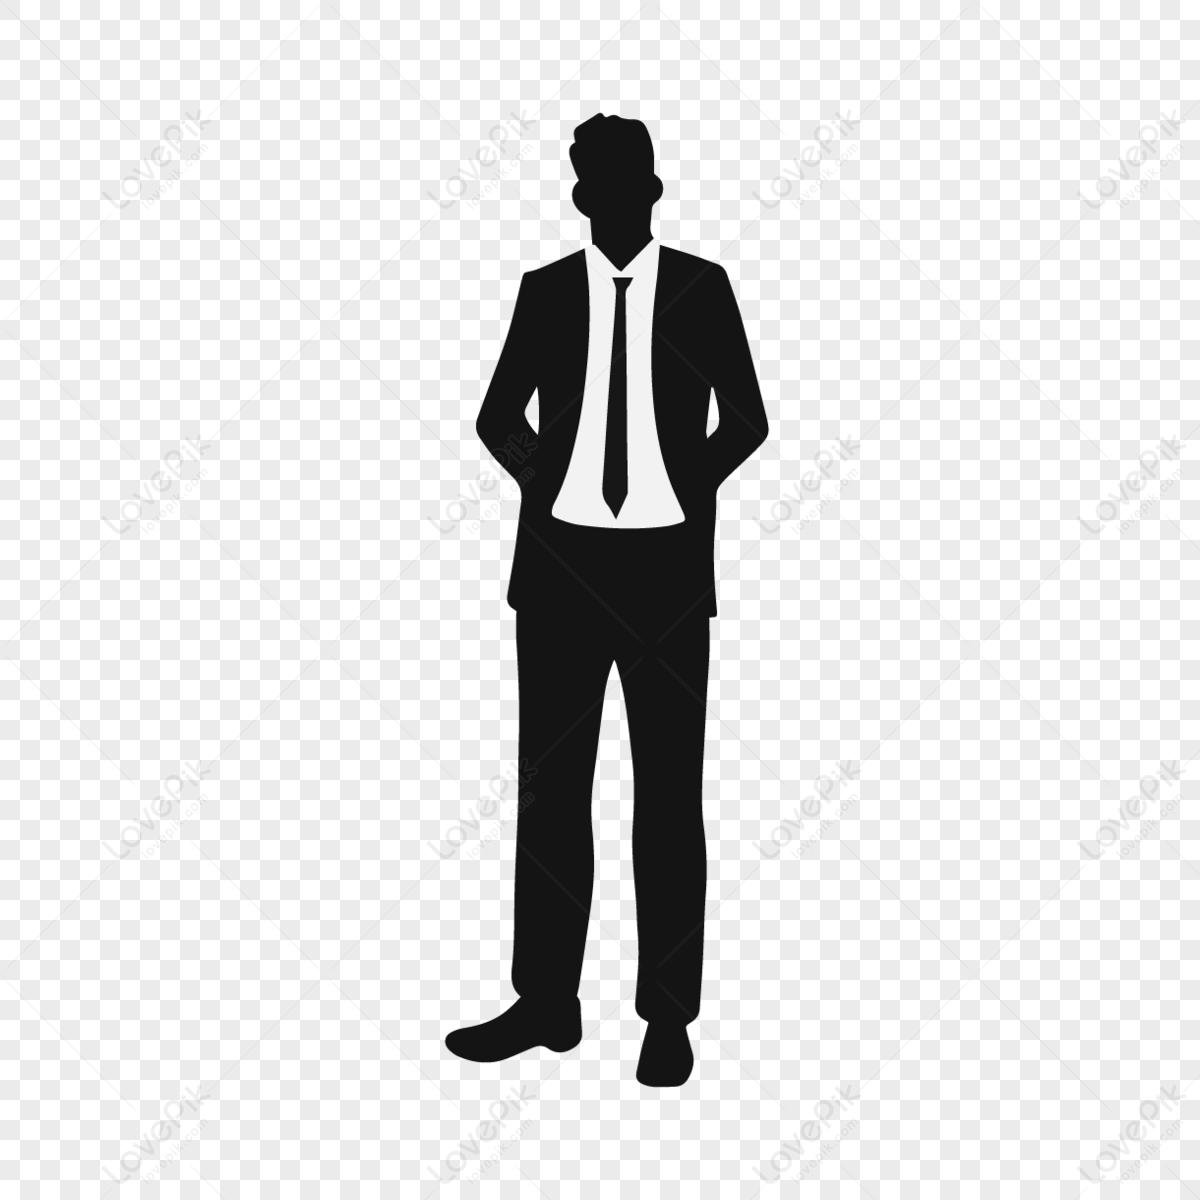 Successful Businessman Black Suit Innovative Tech Concept Standing Pose  Holding Stock Photo by ©BiancoBlue 665628286